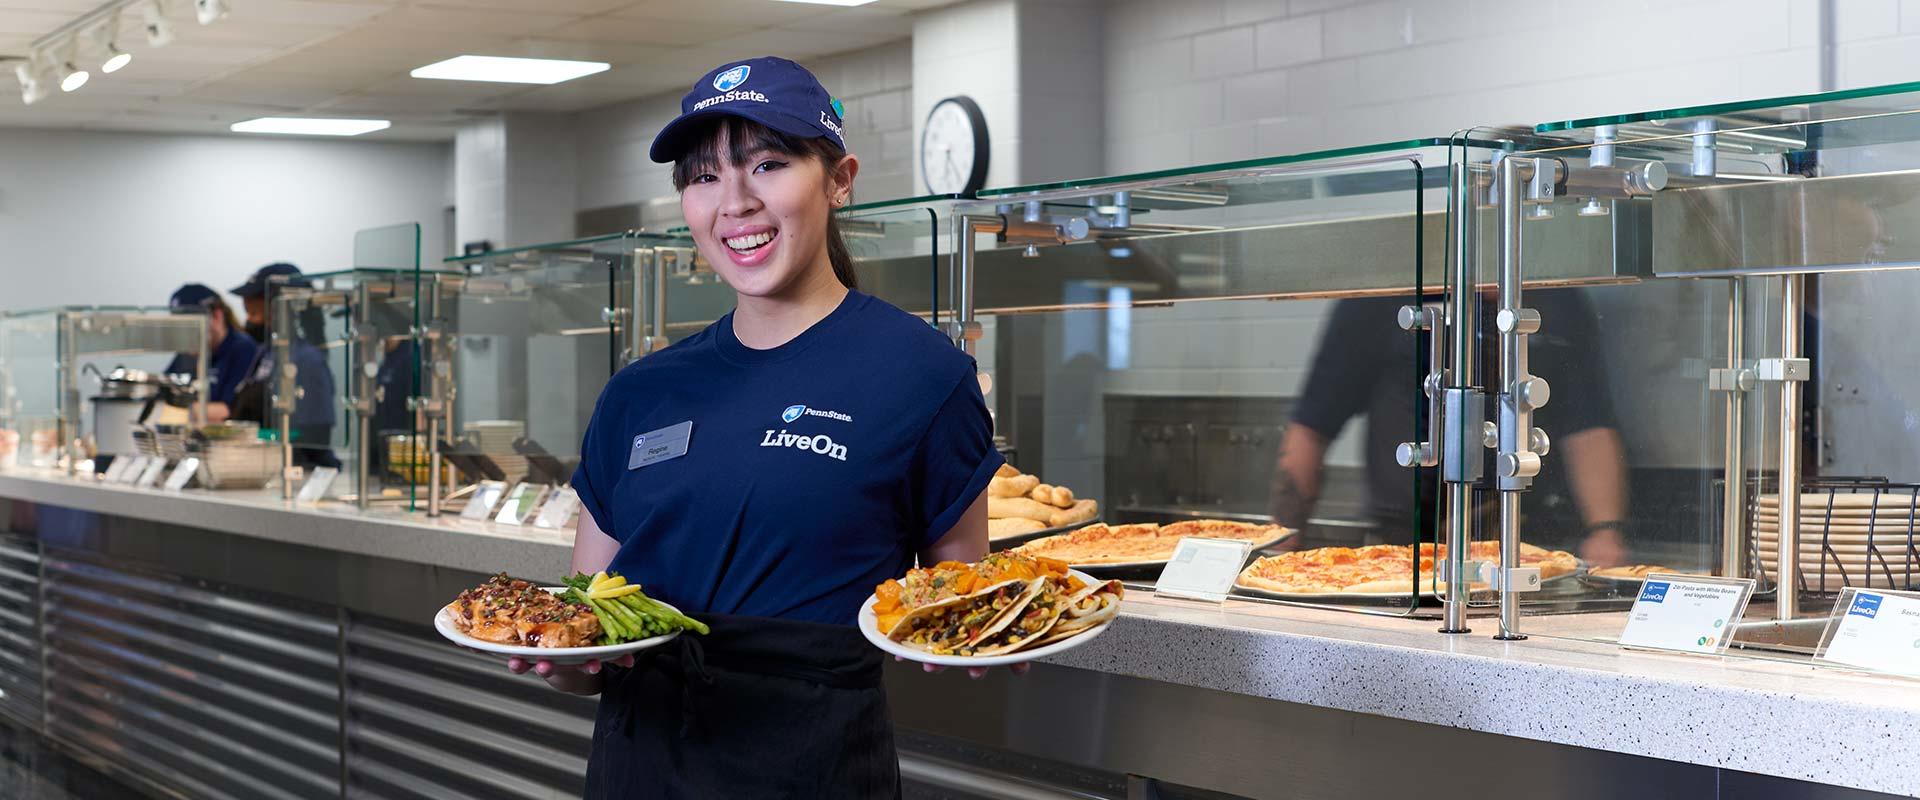 student dining employee presents dinner options